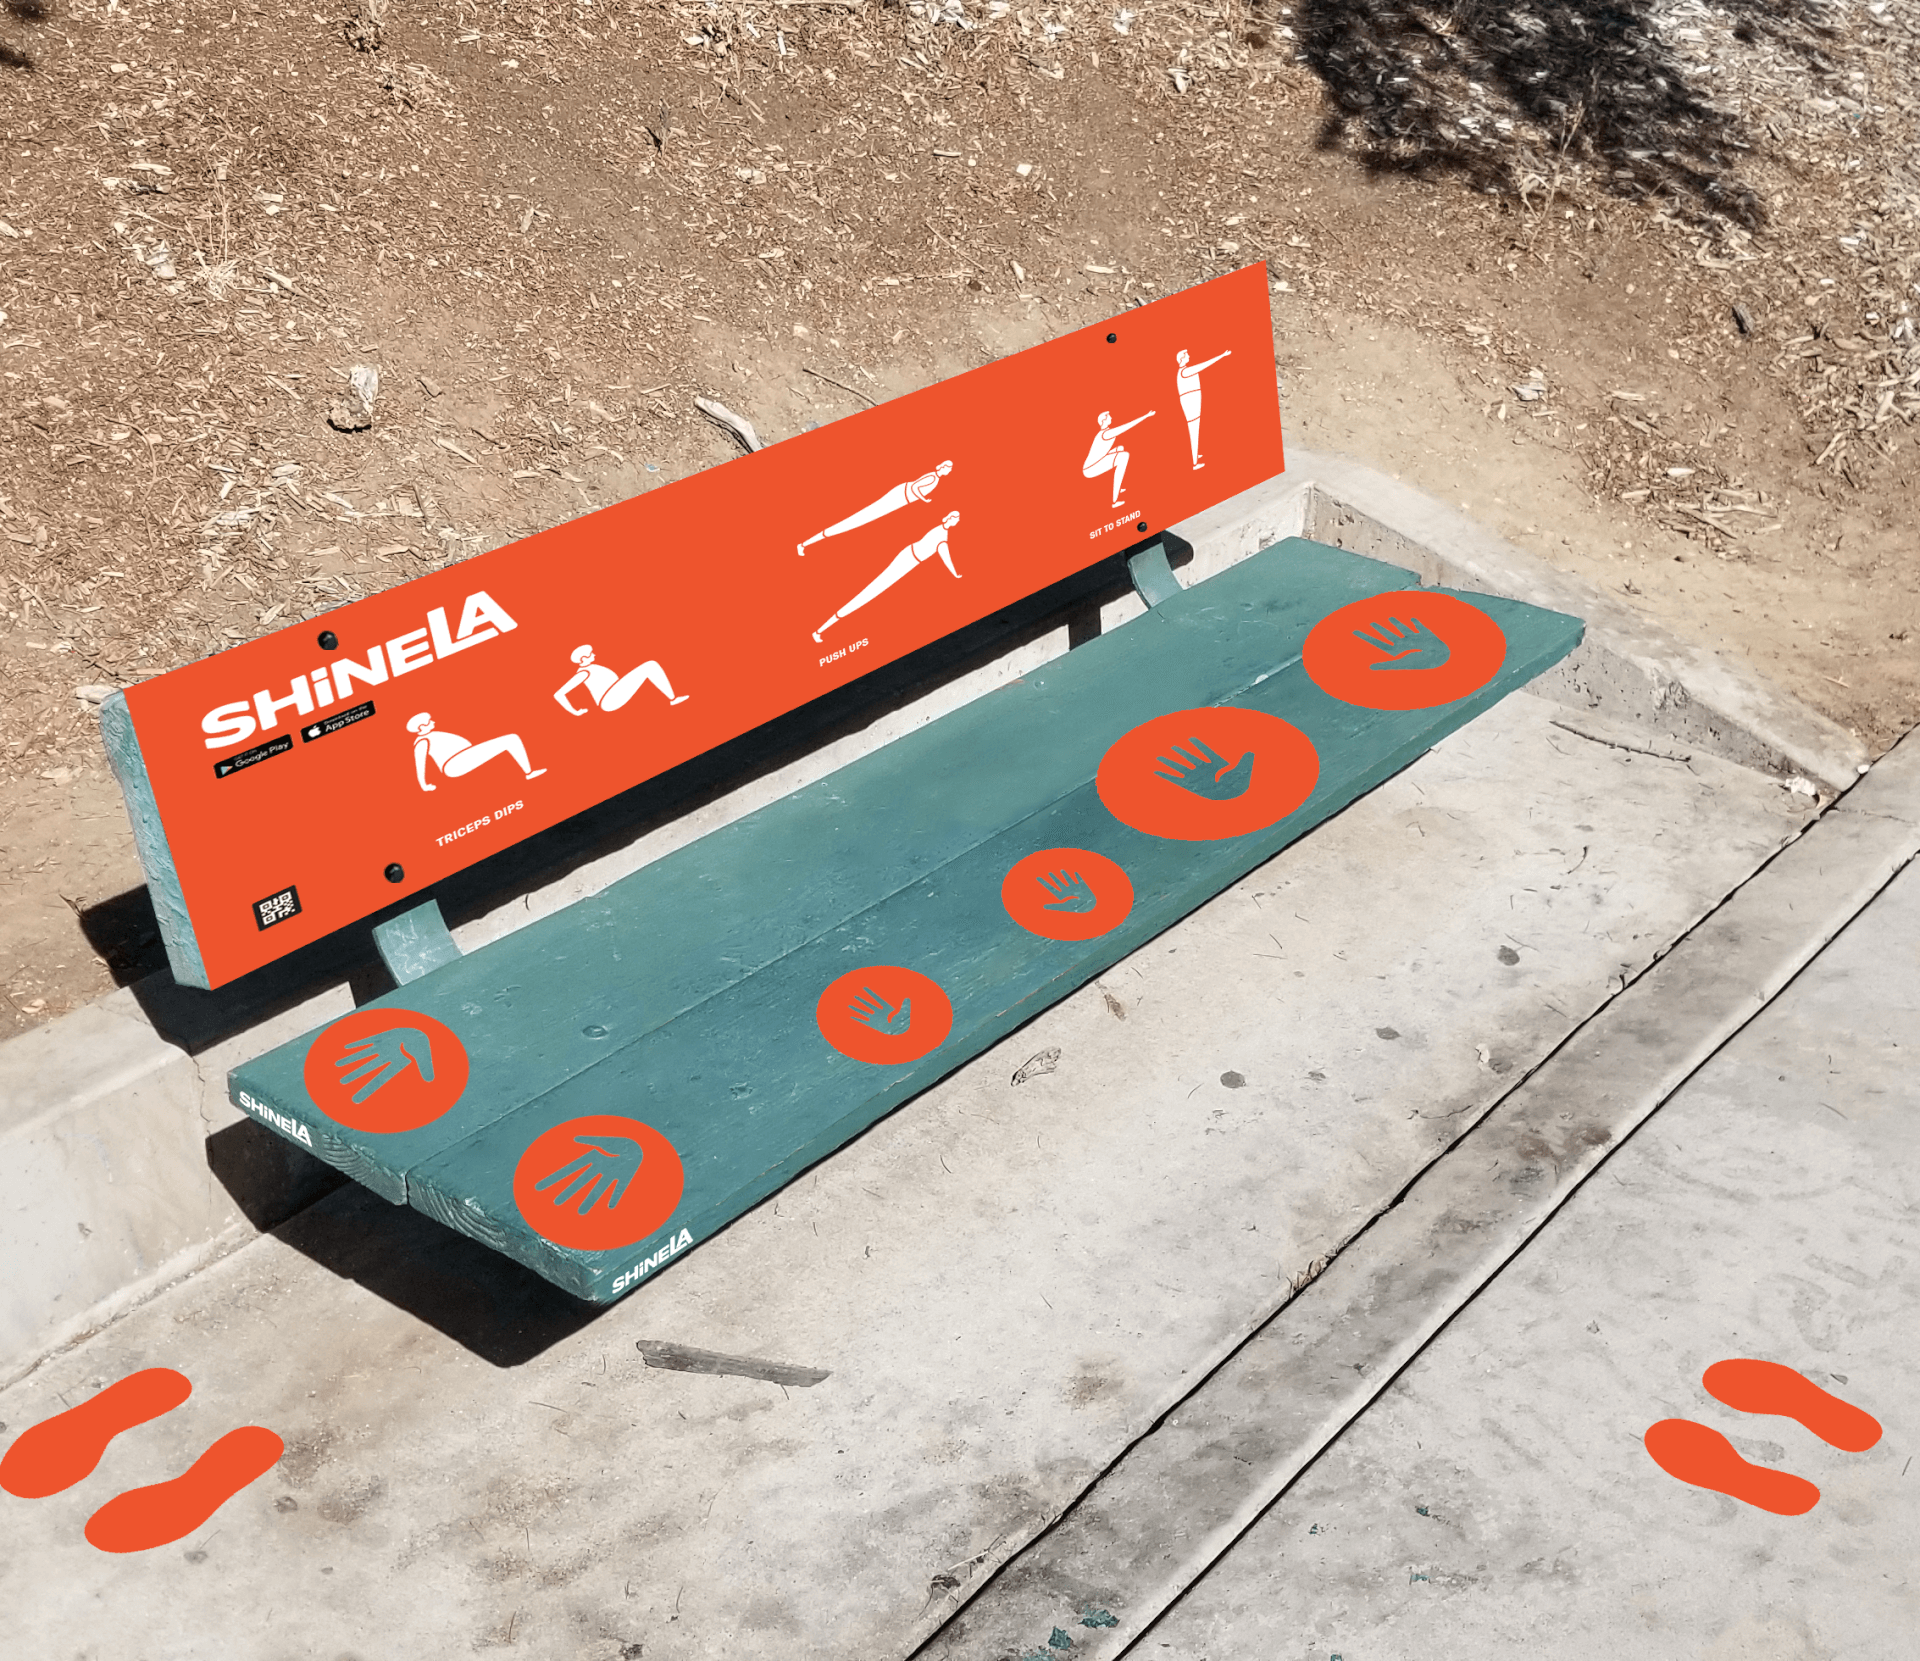 A photo of a bench with instructions on how to do various push-up like esercises. There are handprints on the bench to tell the particpant where to place their hands when exercising.